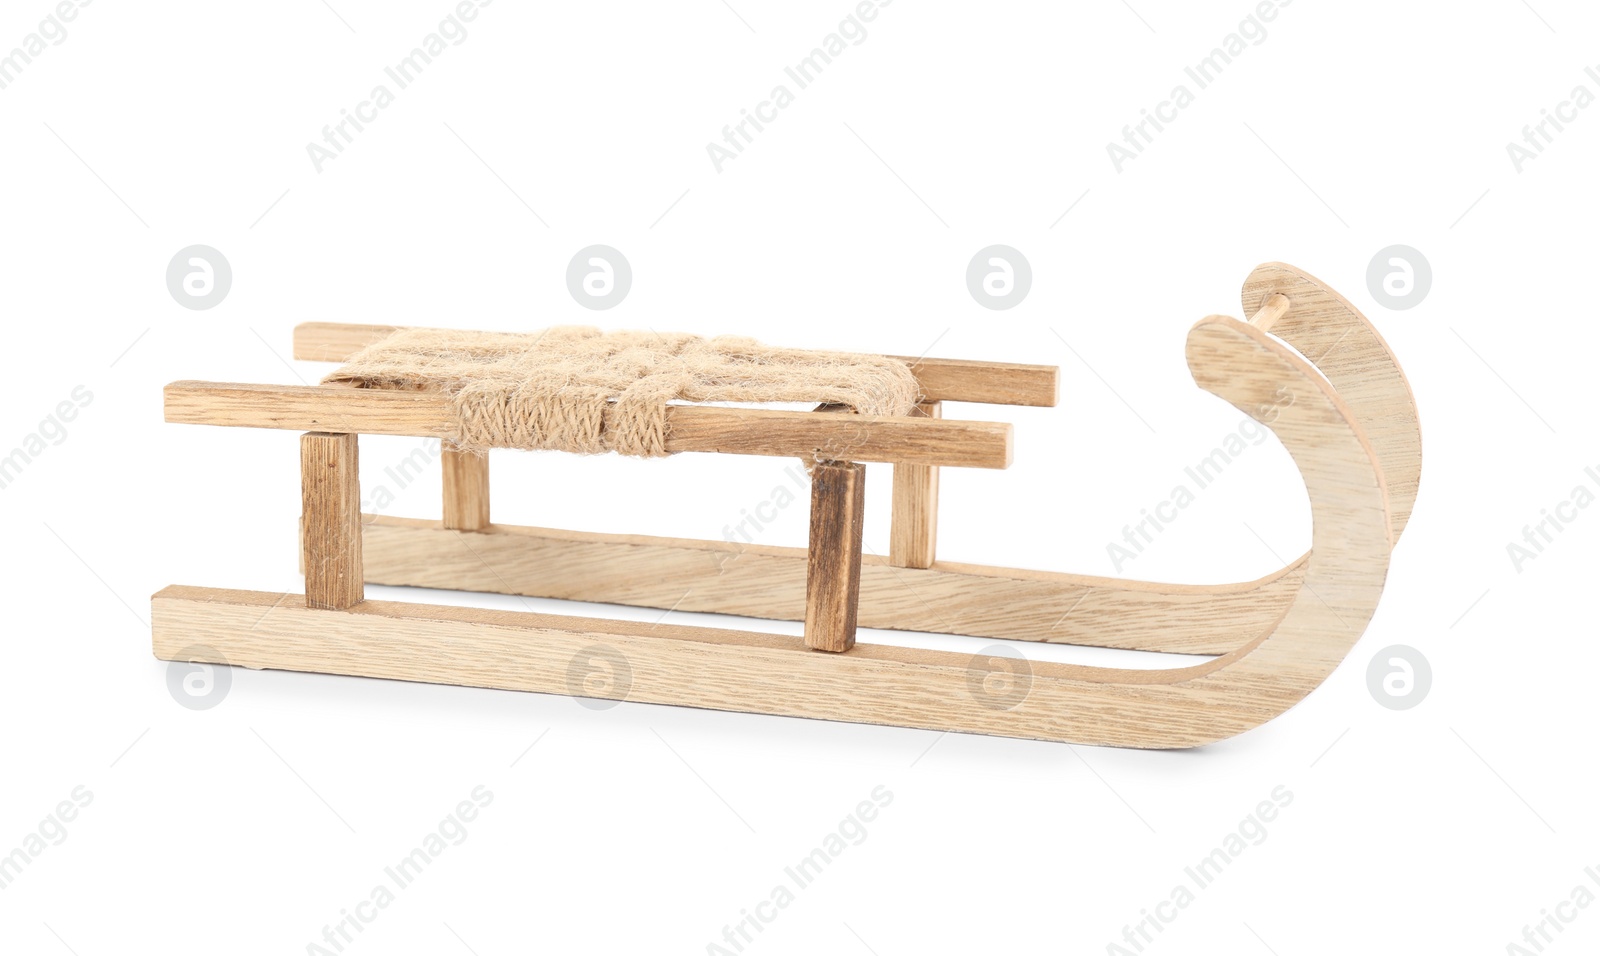 Photo of Empty wooden sleigh on white background. Christmas holiday decor